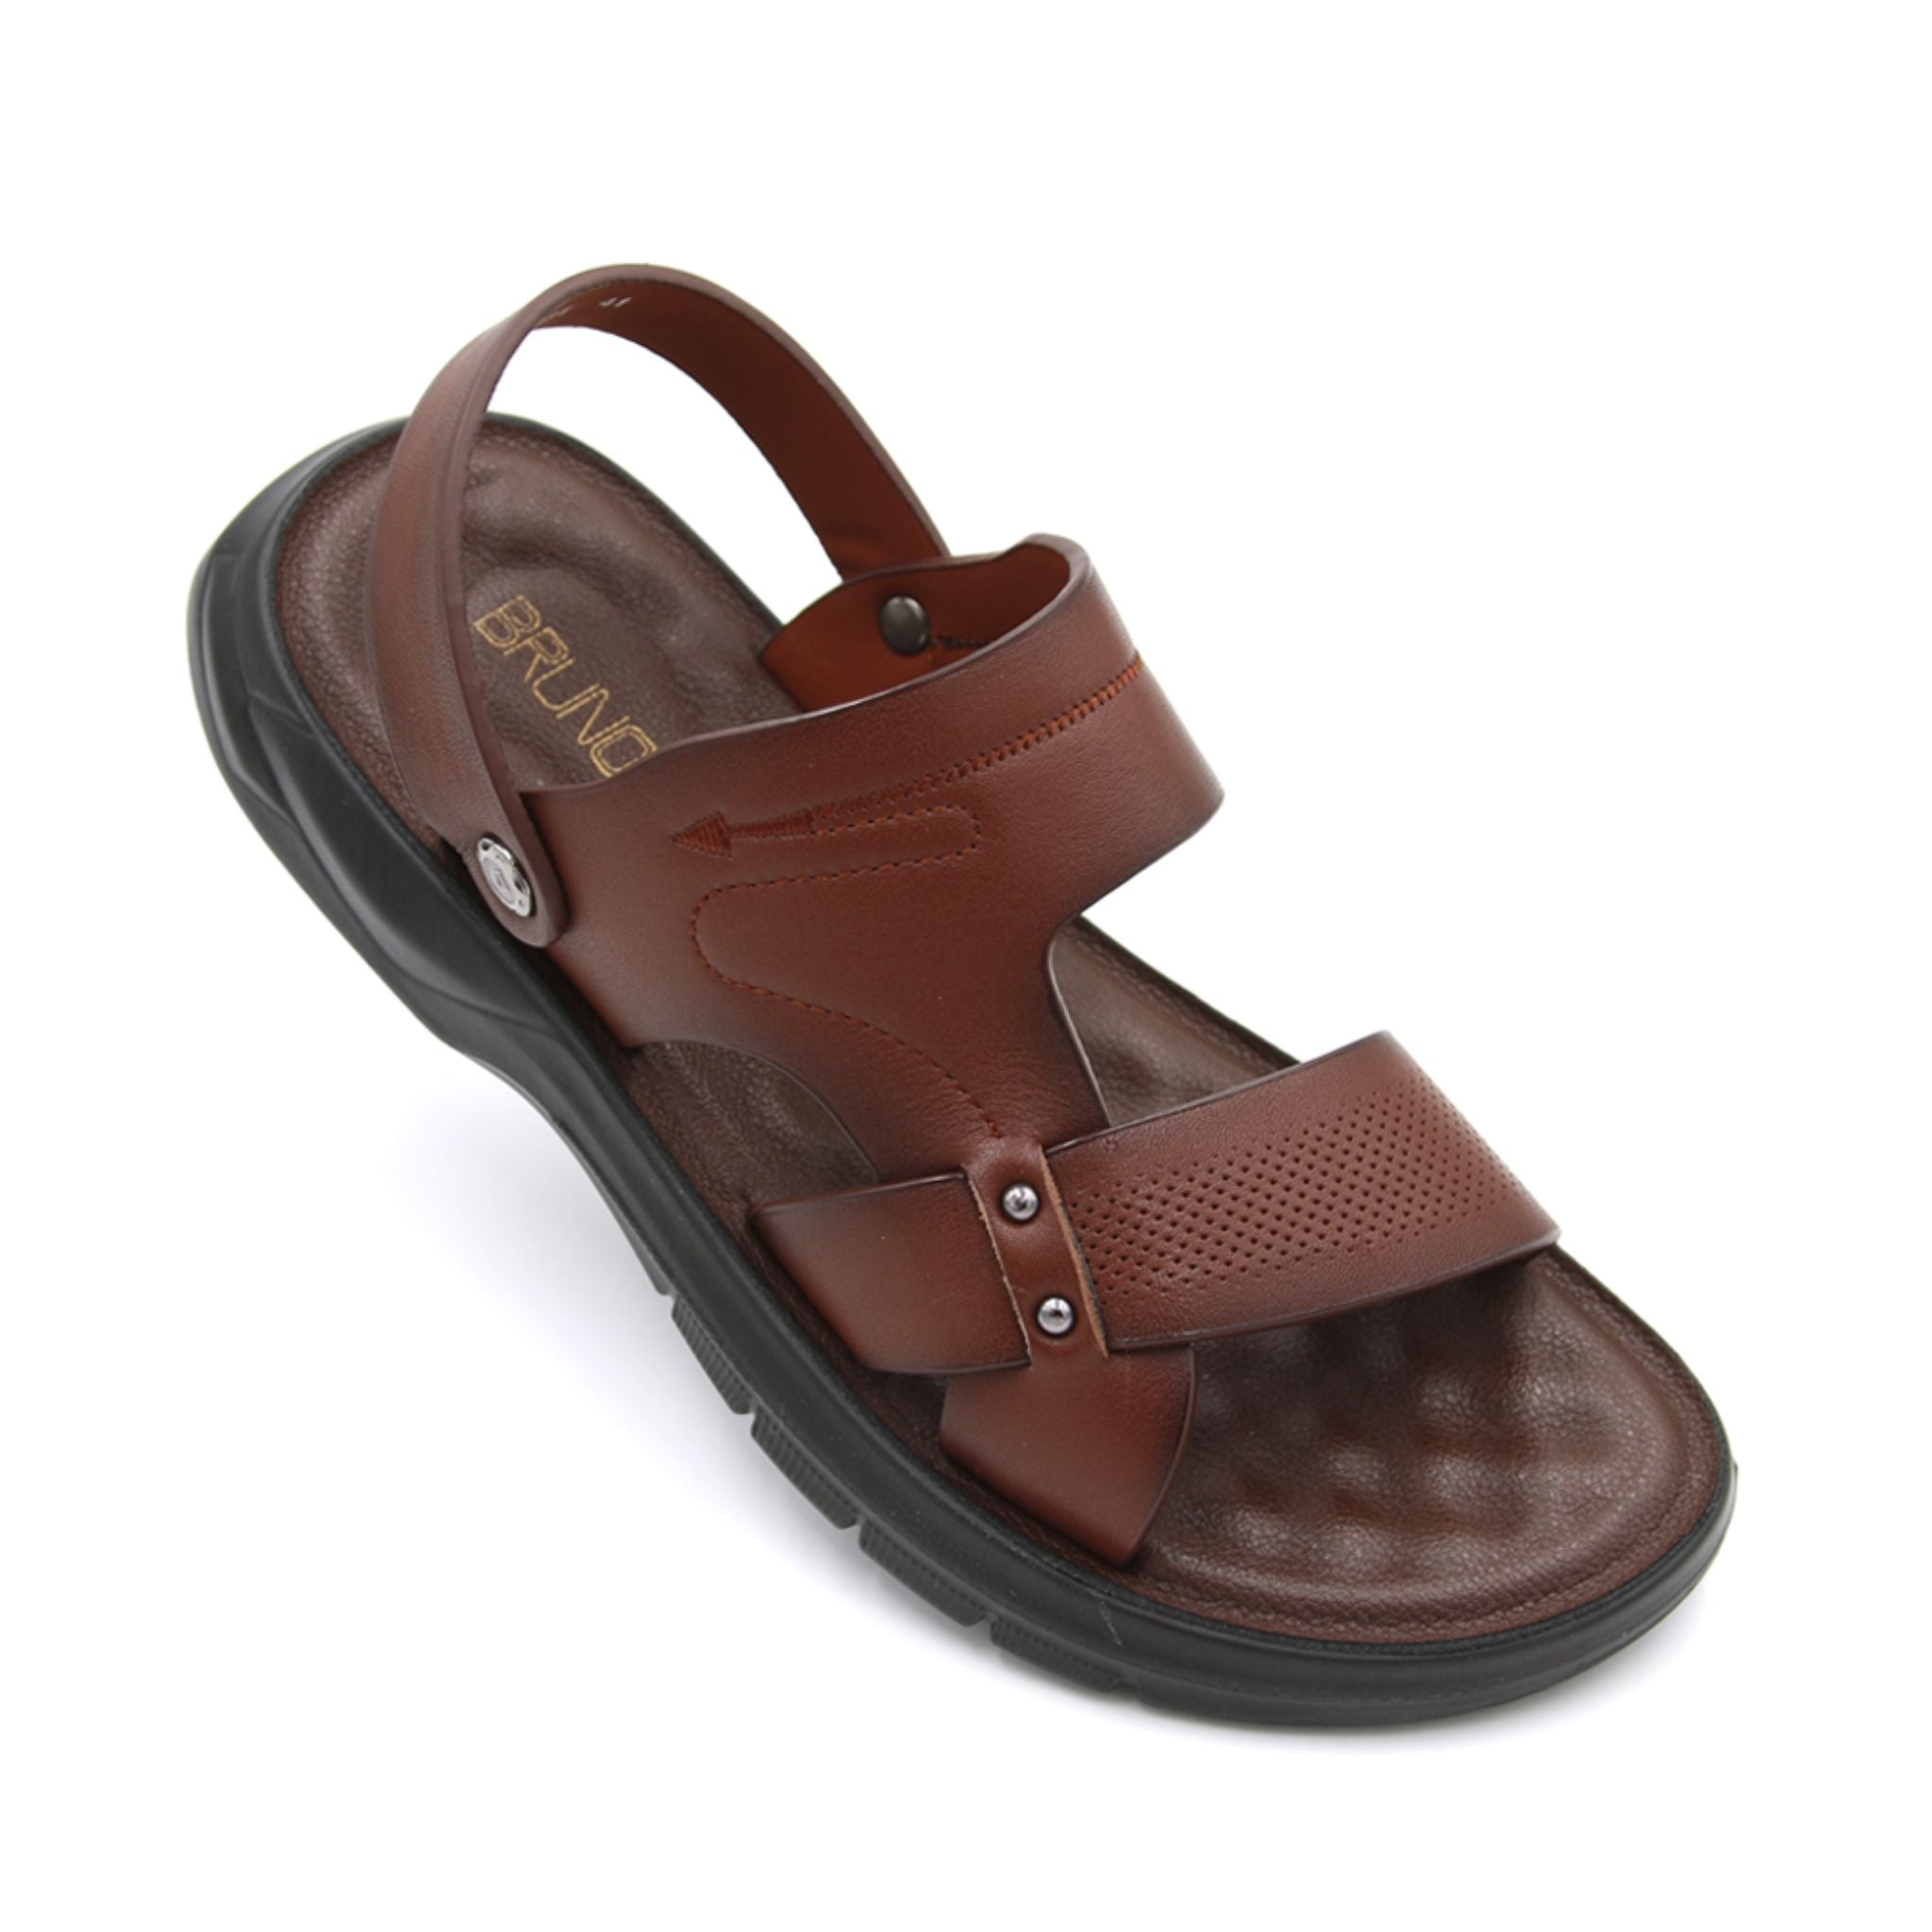 Bruno Co. Don Leather Sandals - Brown